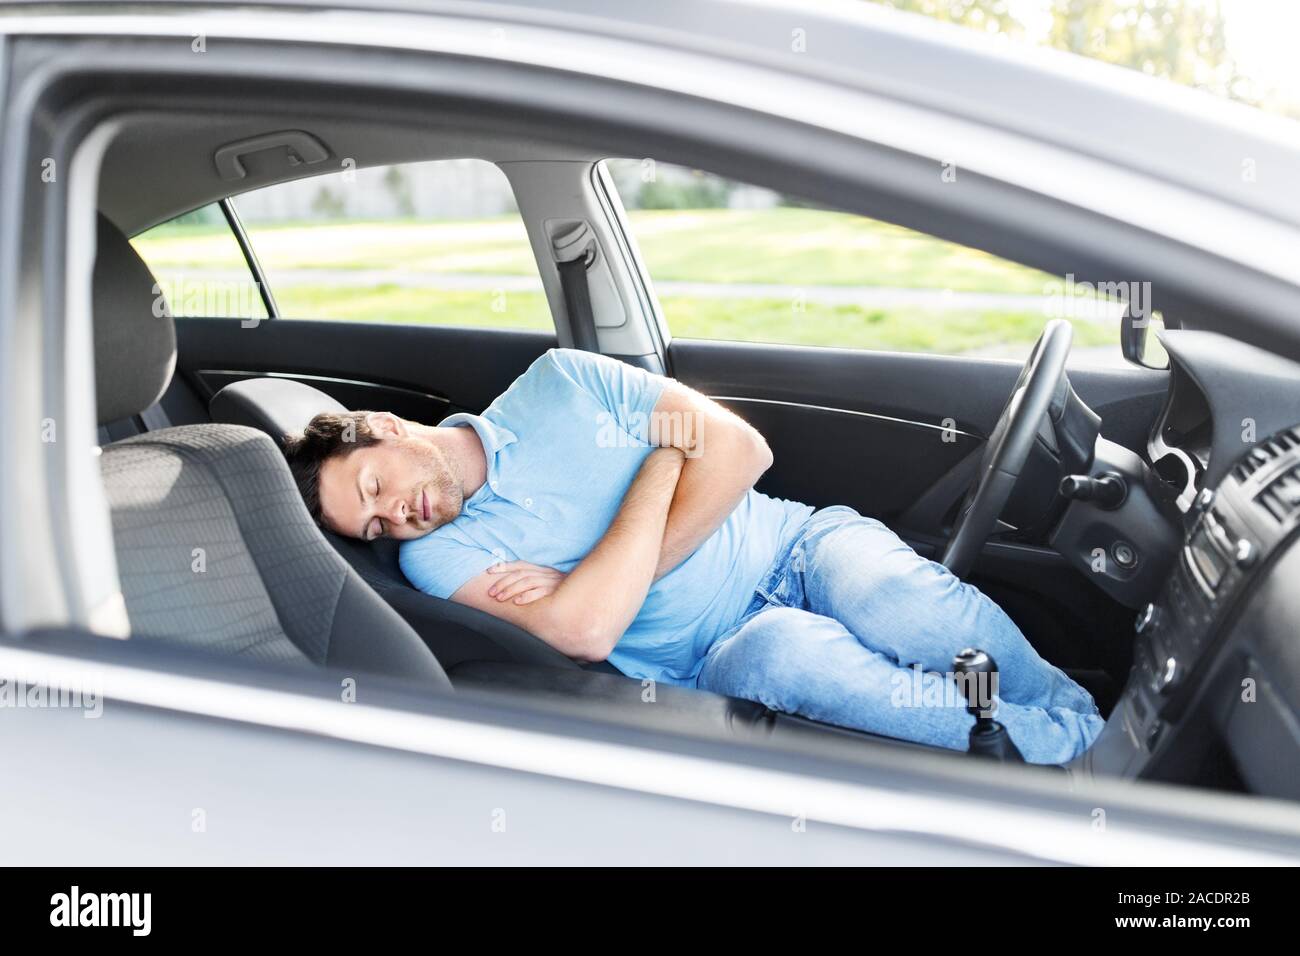 tired man or driver sleeping in car Stock Photo